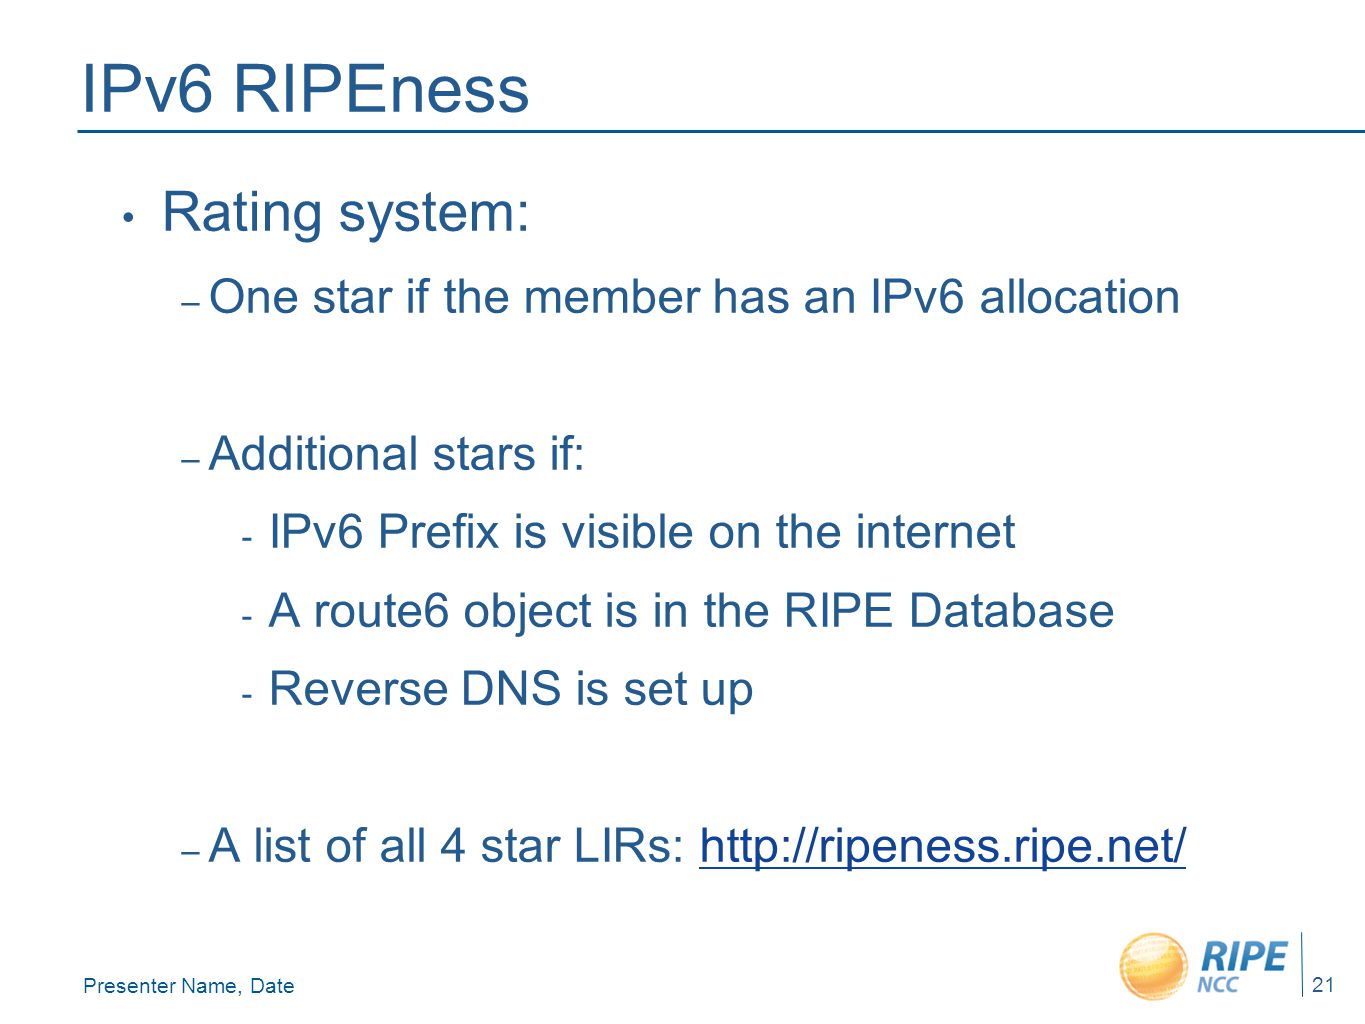 Presenter Name, Date 21 IPv6 RIPEness Rating system: – One star if the member has an IPv6 allocation – Additional stars if: - IPv6 Prefix is visible on the internet - A route6 object is in the RIPE Database - Reverse DNS is set up – A list of all 4 star LIRs: